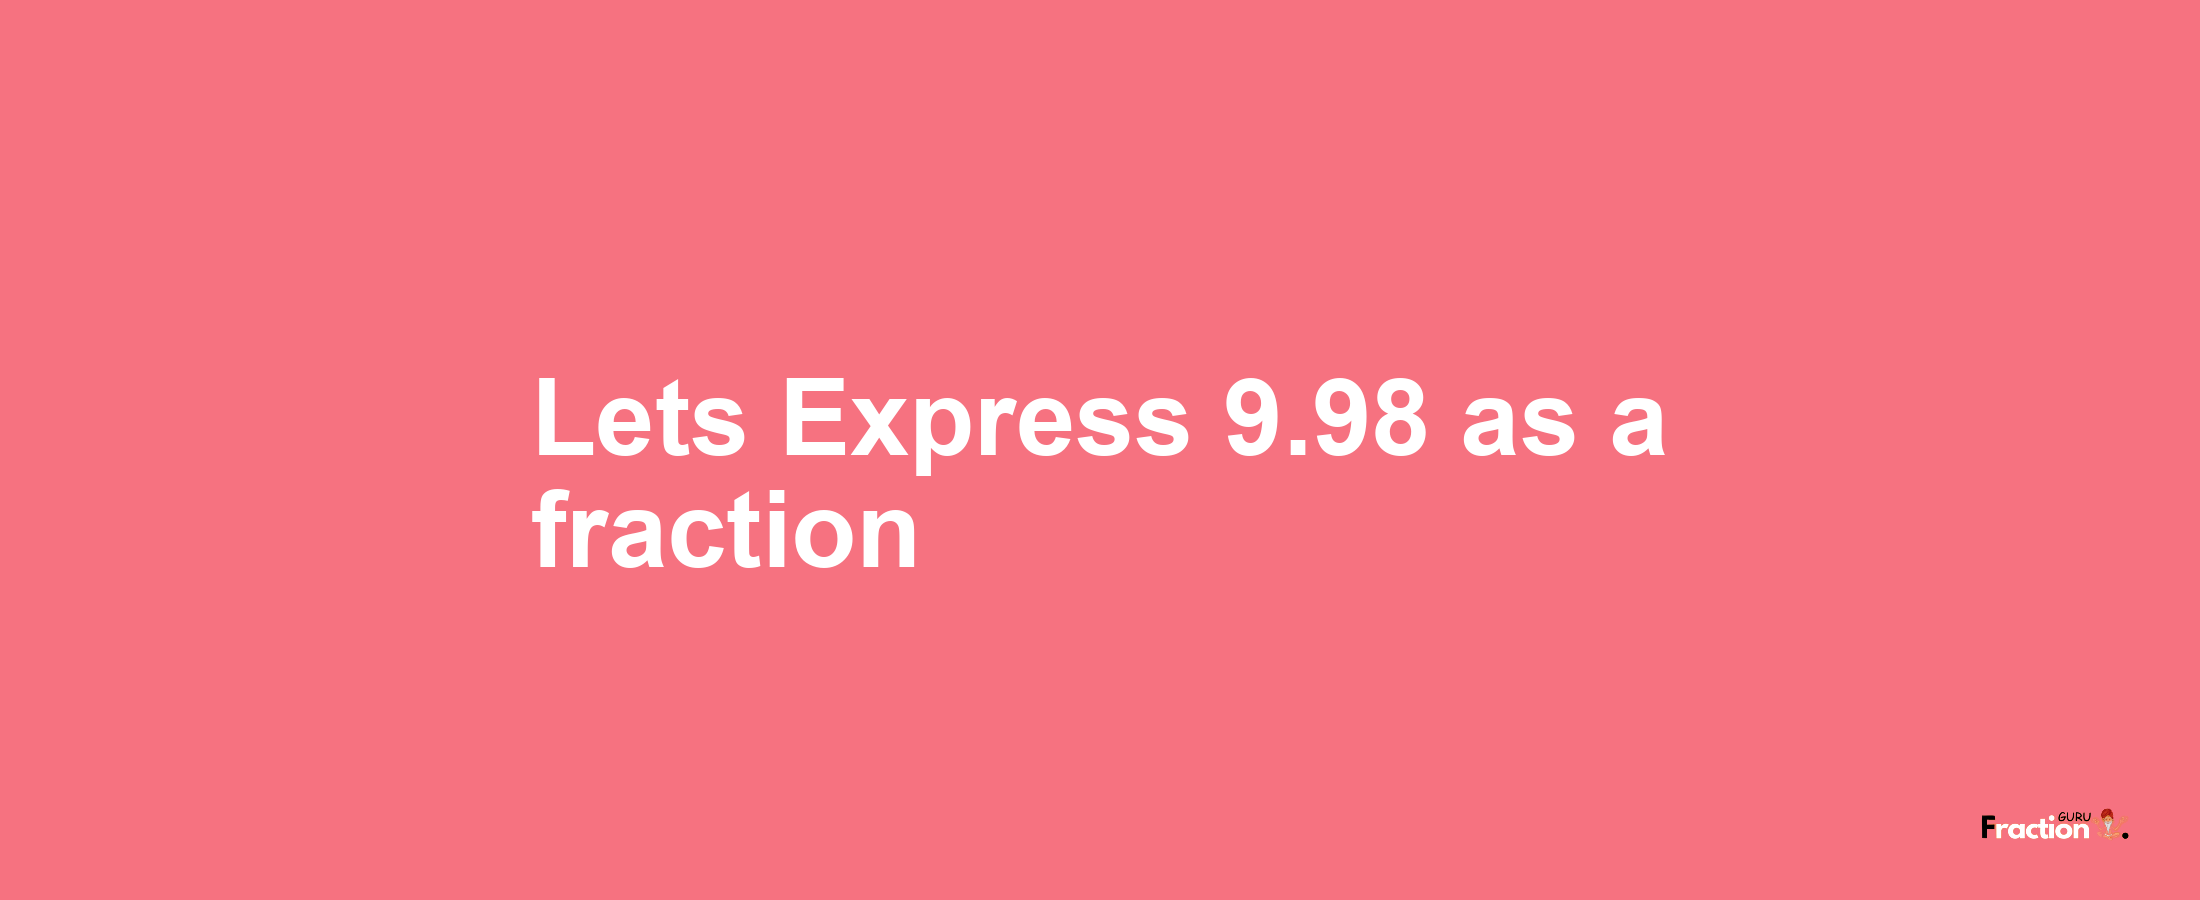 Lets Express 9.98 as afraction